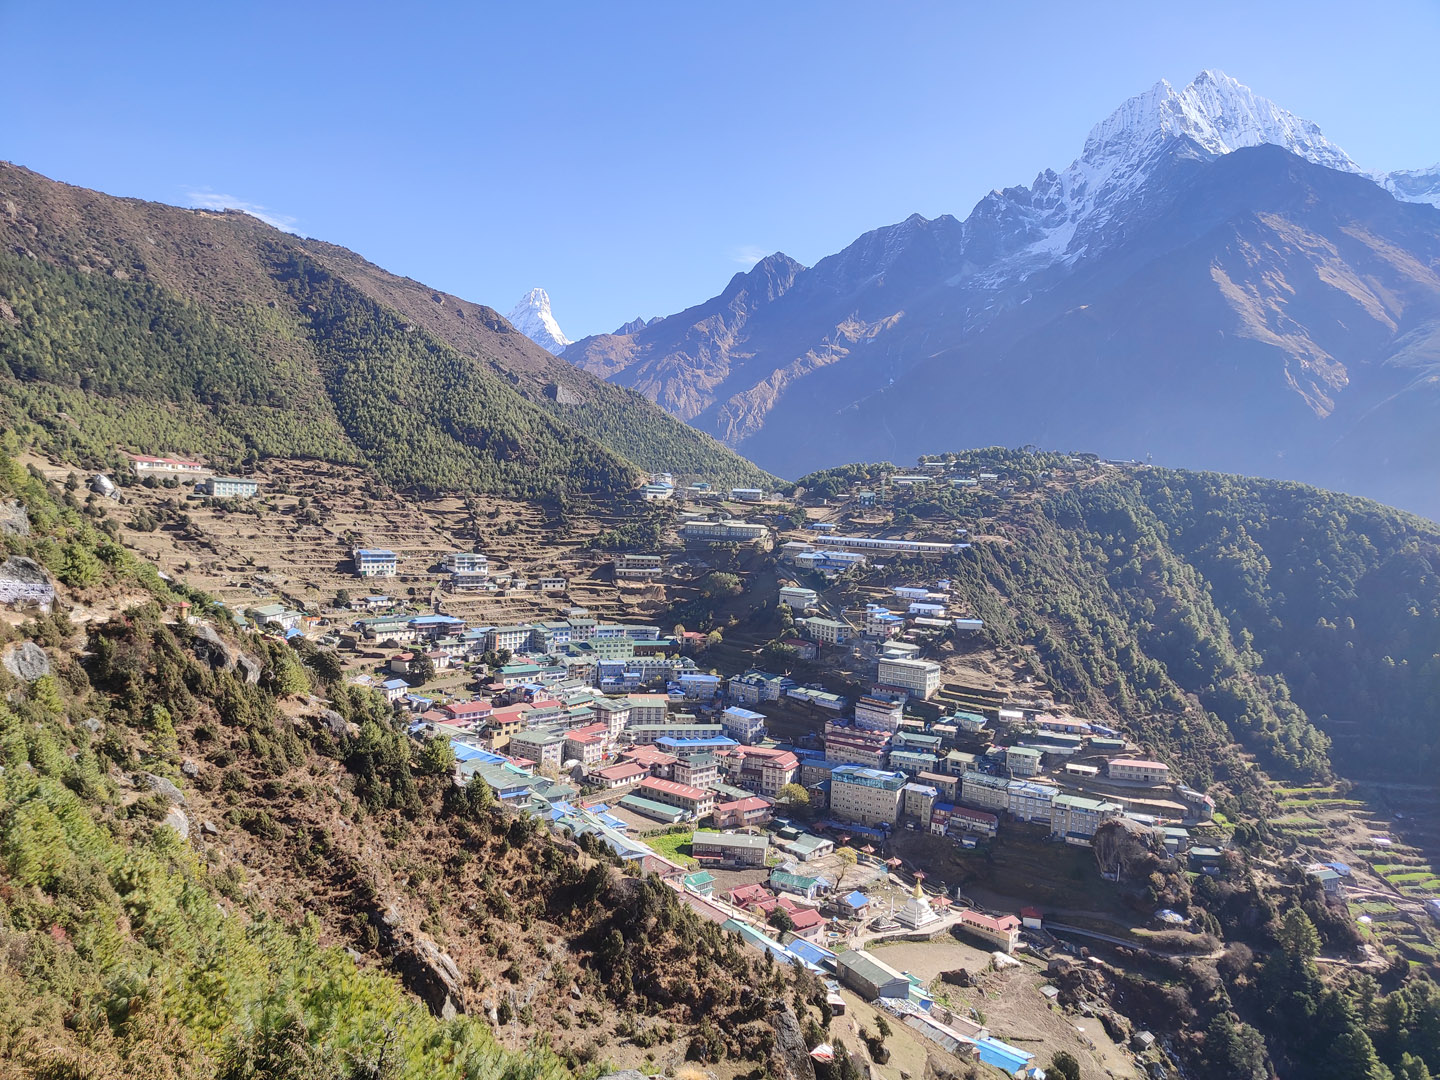 Namche Bazaar on a clear day with mount Thamserku in the background